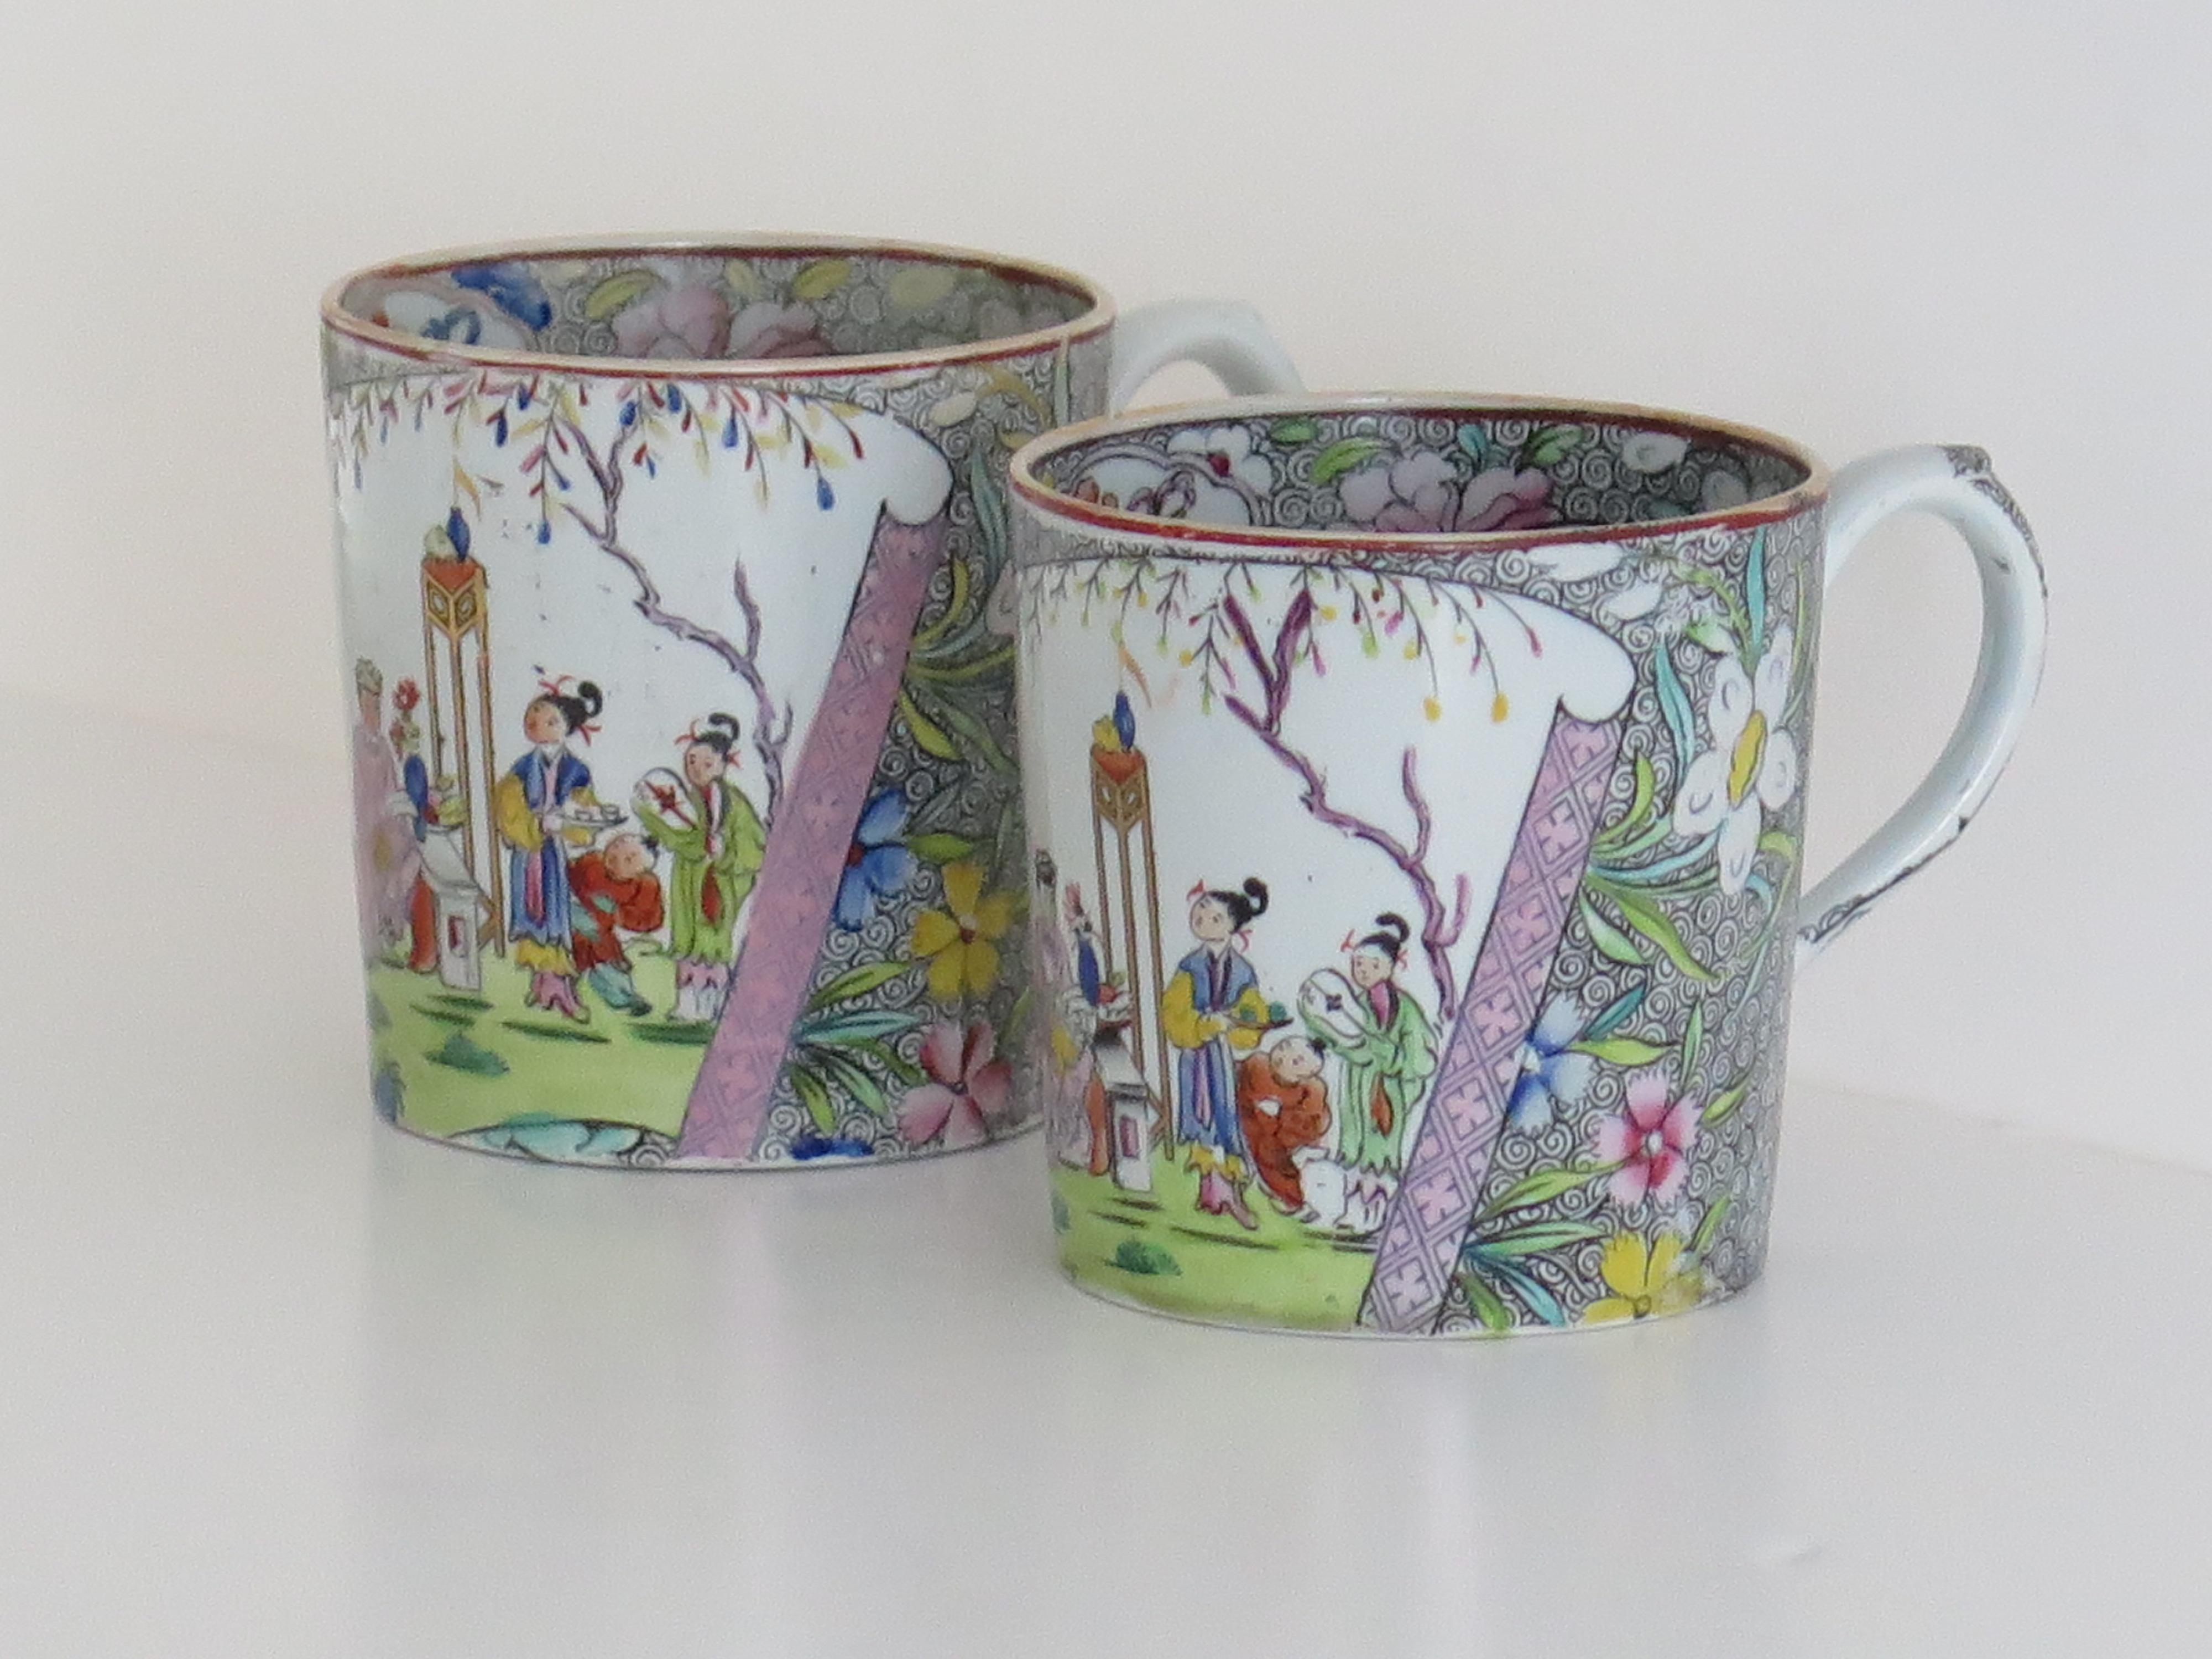 These are a matching PAIR of Ironstone pottery mugs made by the Mason's factory at Lane Delph, Staffordshire, England and is decorated in the Chinese Scroll Pattern, fully stamped and dating to the earliest period of Mason's Ironstone production,